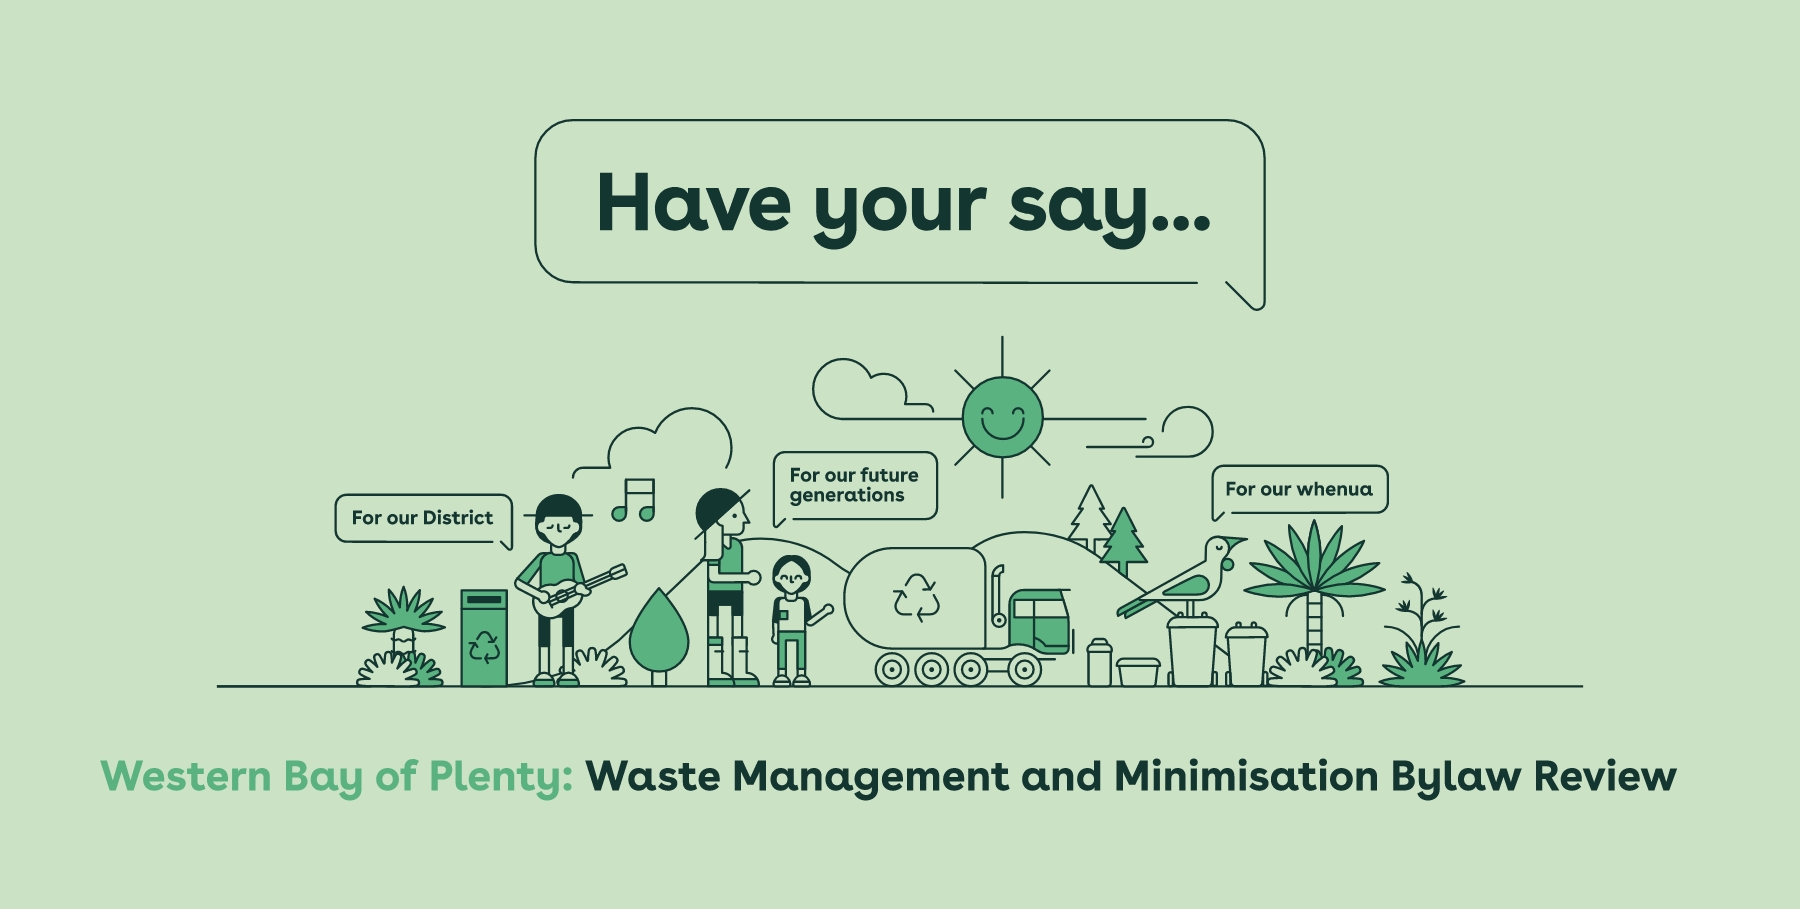 Council’s Waste Management and Minimisation Bylaw review is out for public feedback until 26 November